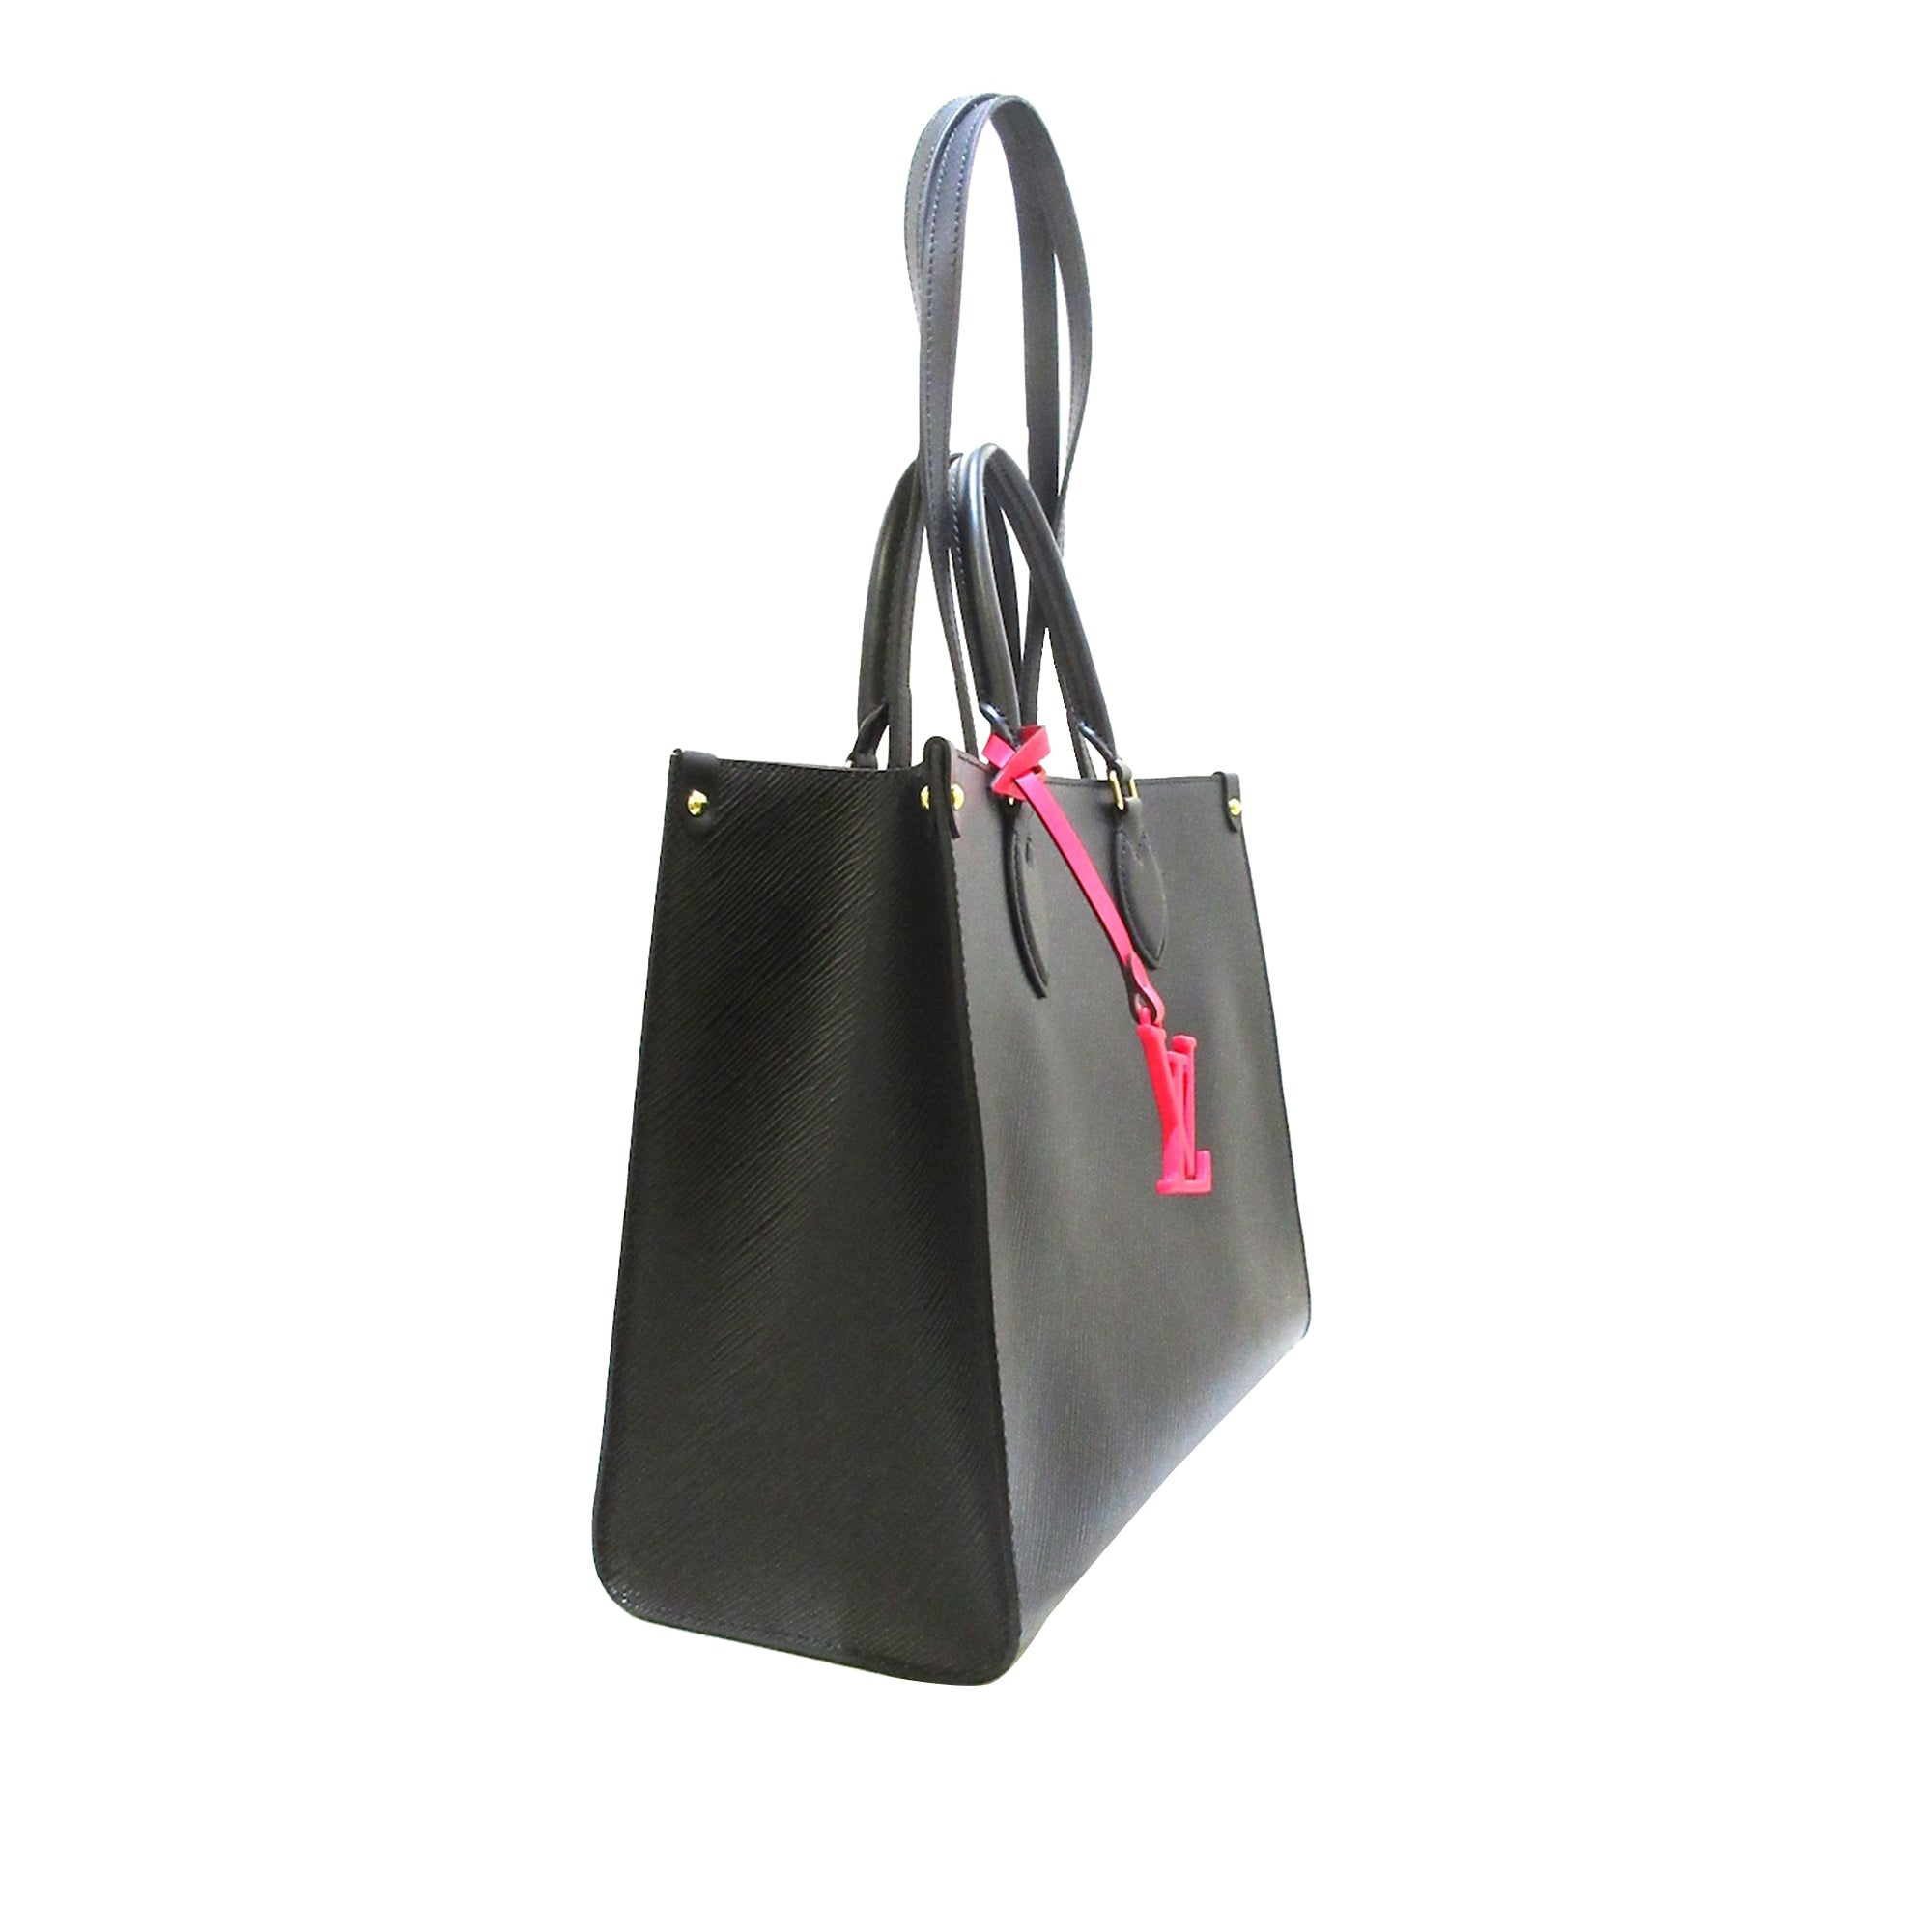 Louis Vuitton Leather OnTheGo MM Tote Bag